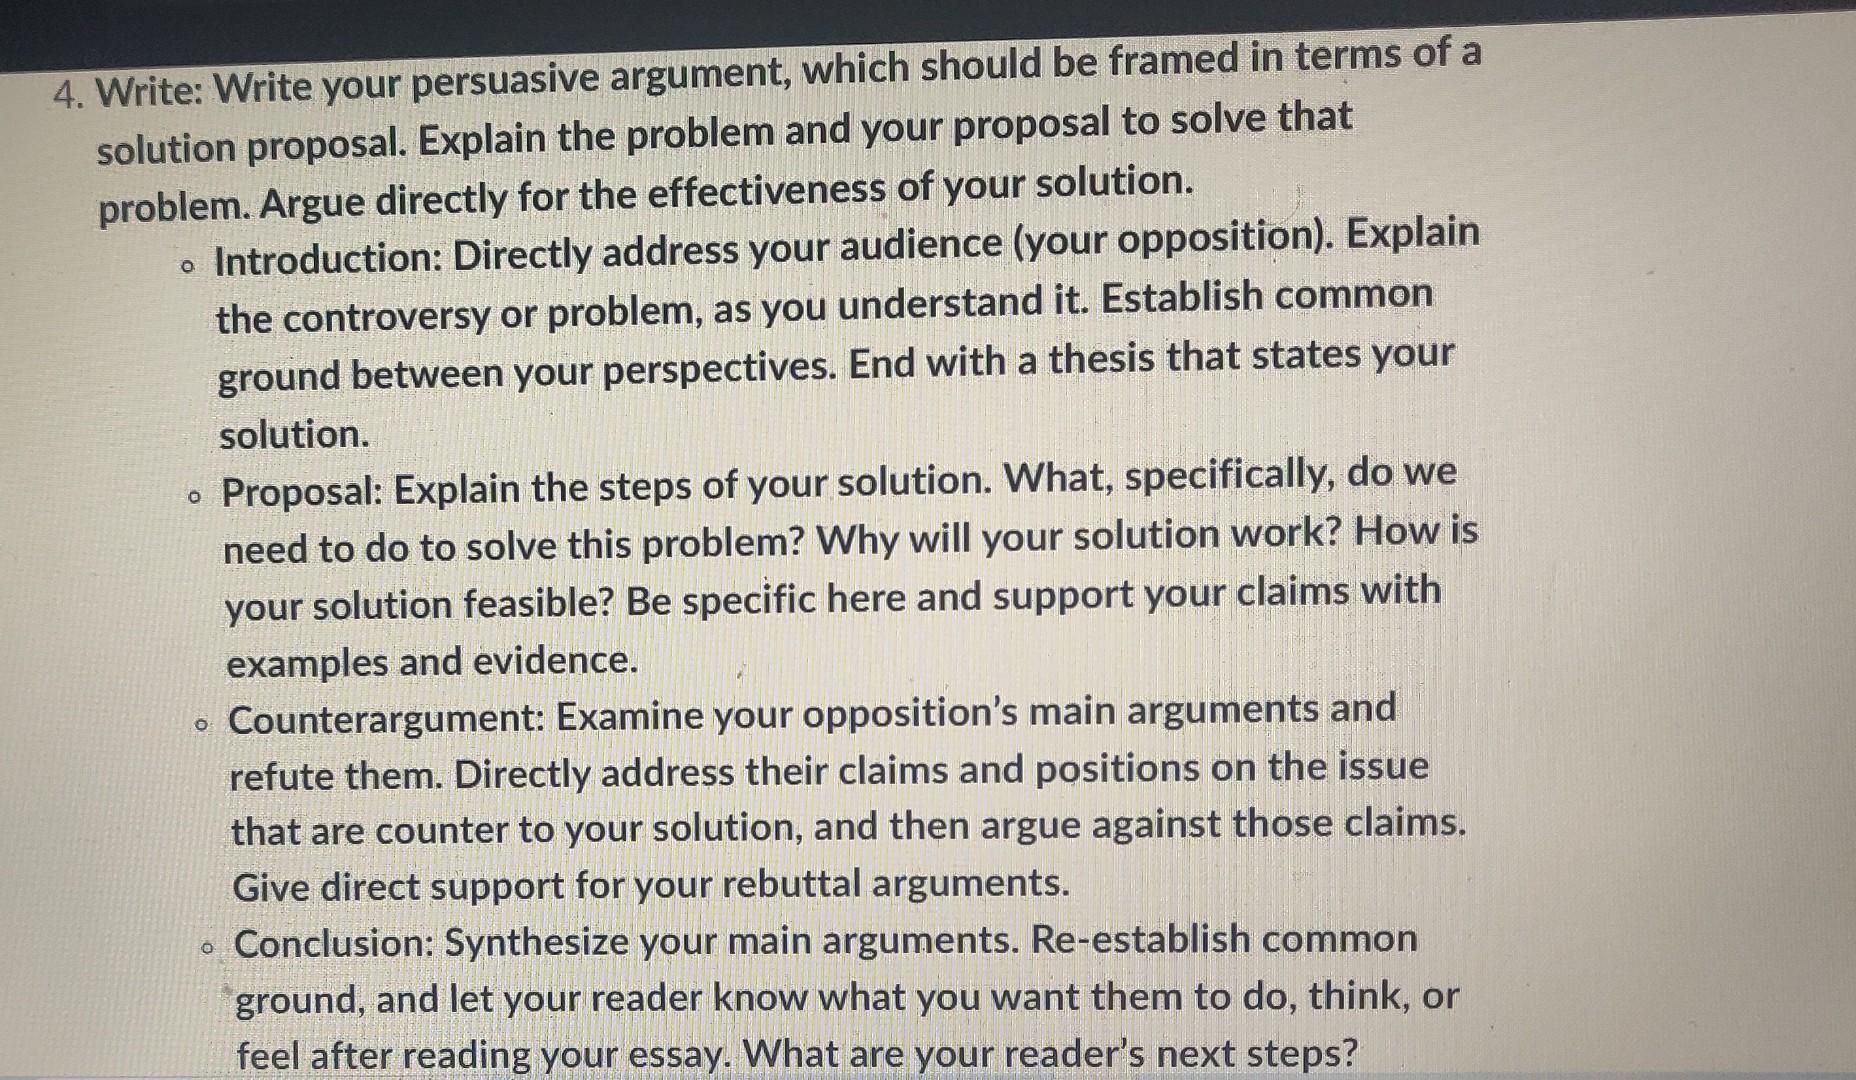 4. Write: Write your persuasive argument, which should be framed in terms of a solution proposal. Explain the